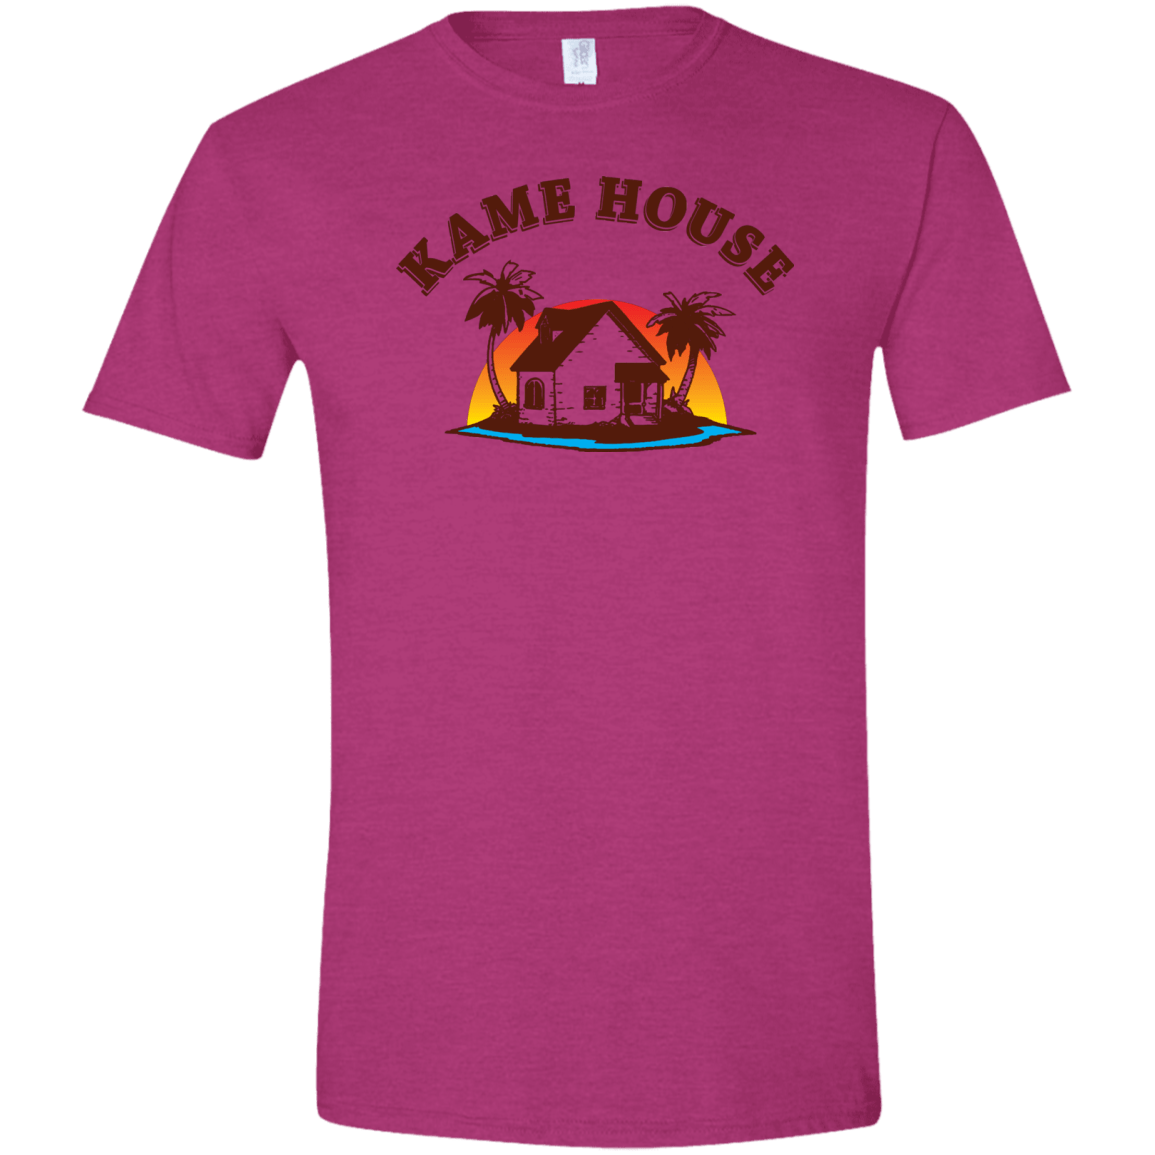 T-Shirts Antique Heliconia / S Kame House Men's Semi-Fitted Softstyle